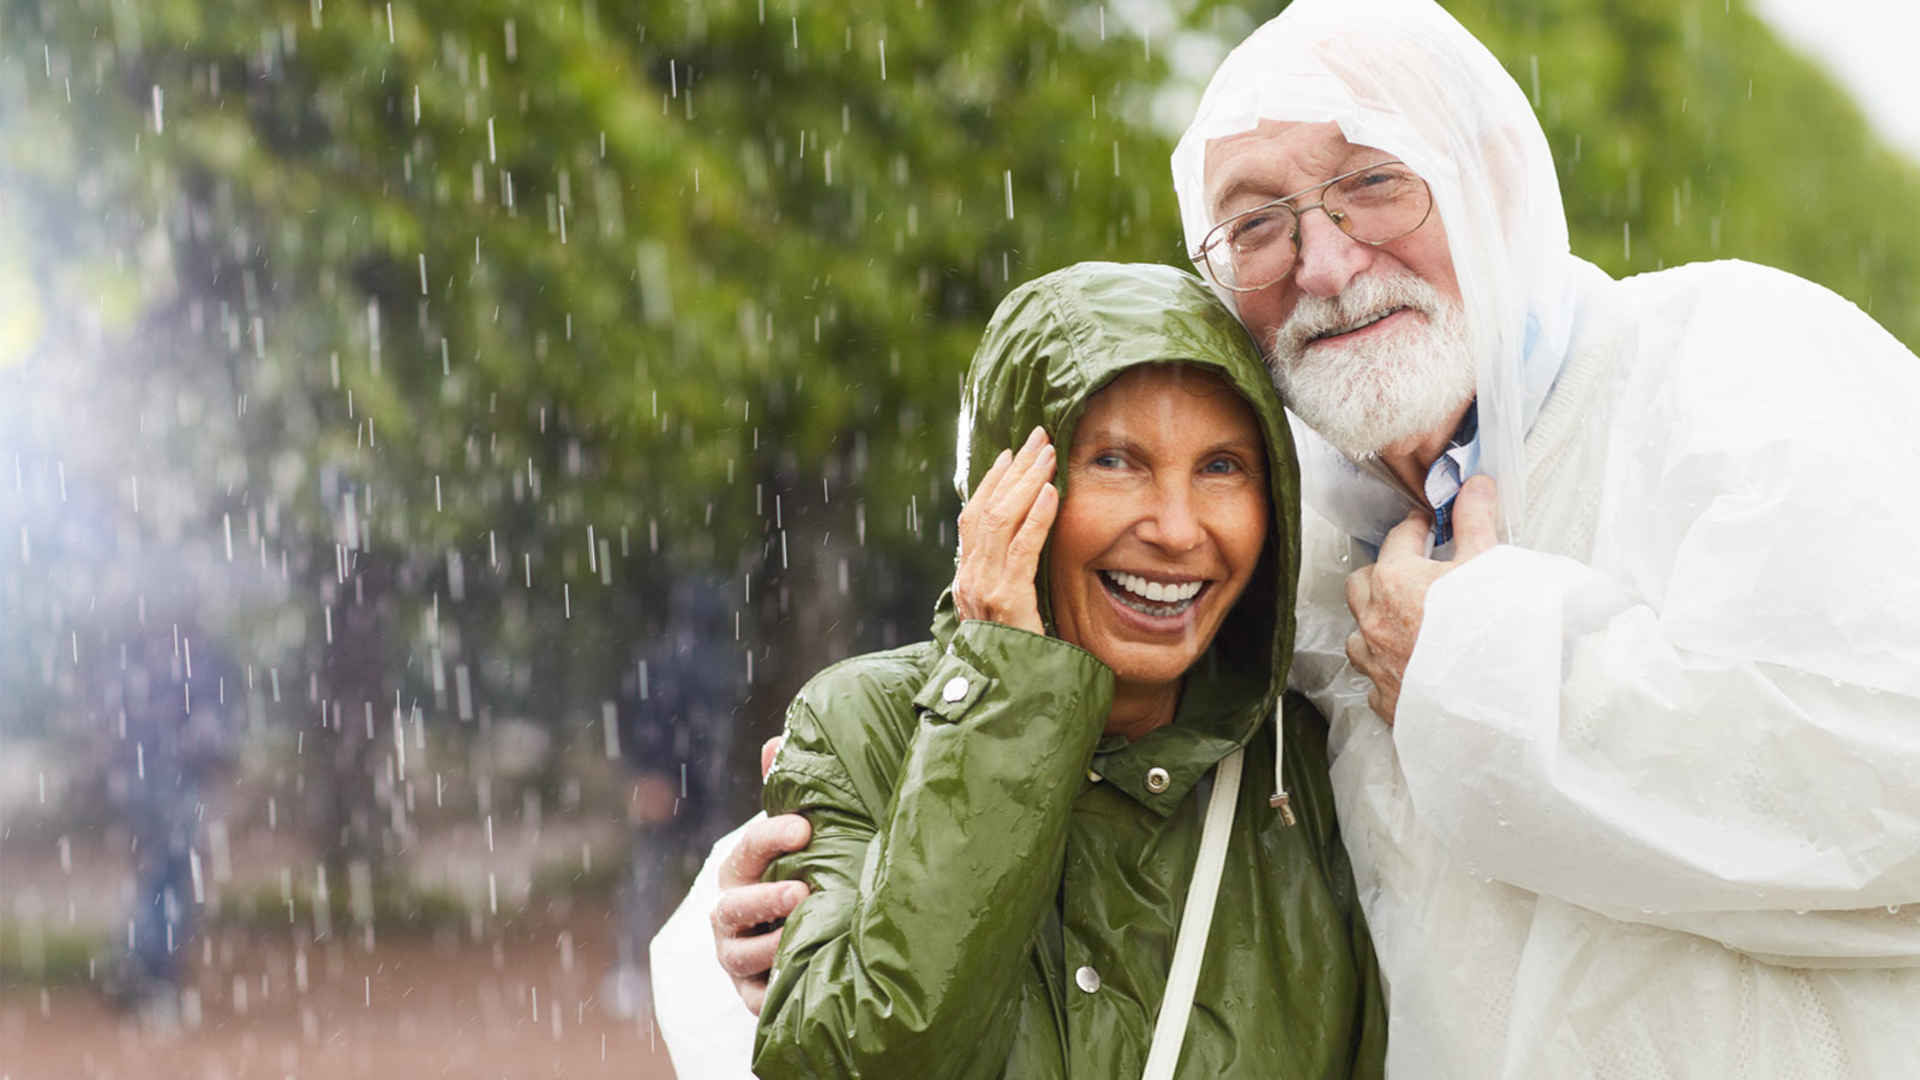 woman-and-man-staying-outside-in-the-rain1920x1080